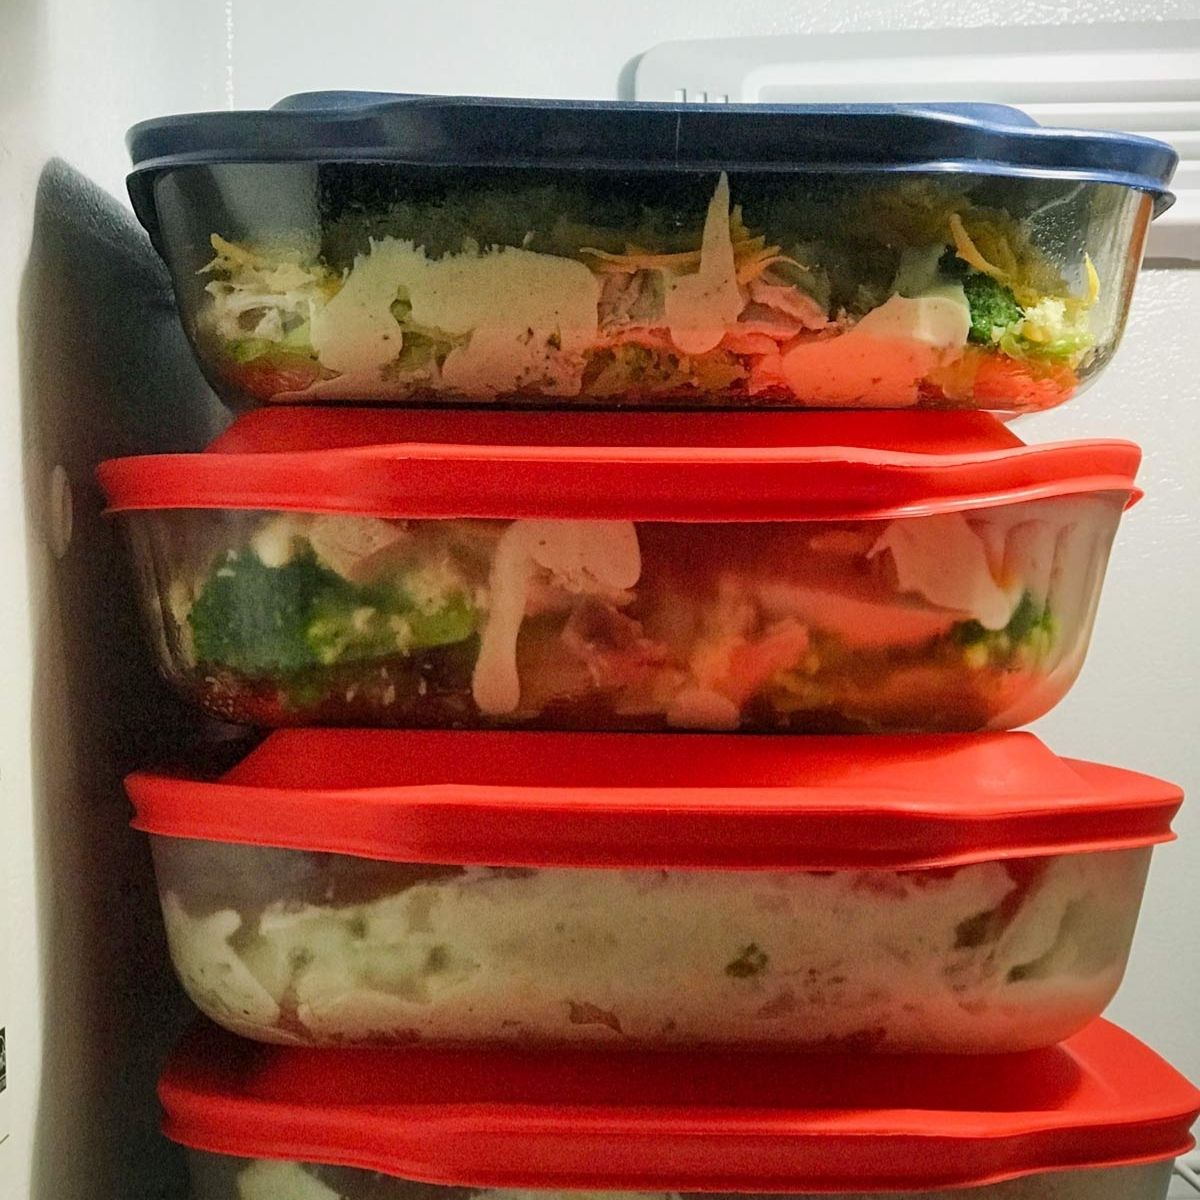 The BEST Containers for Freezer Cooking Meal Prep 